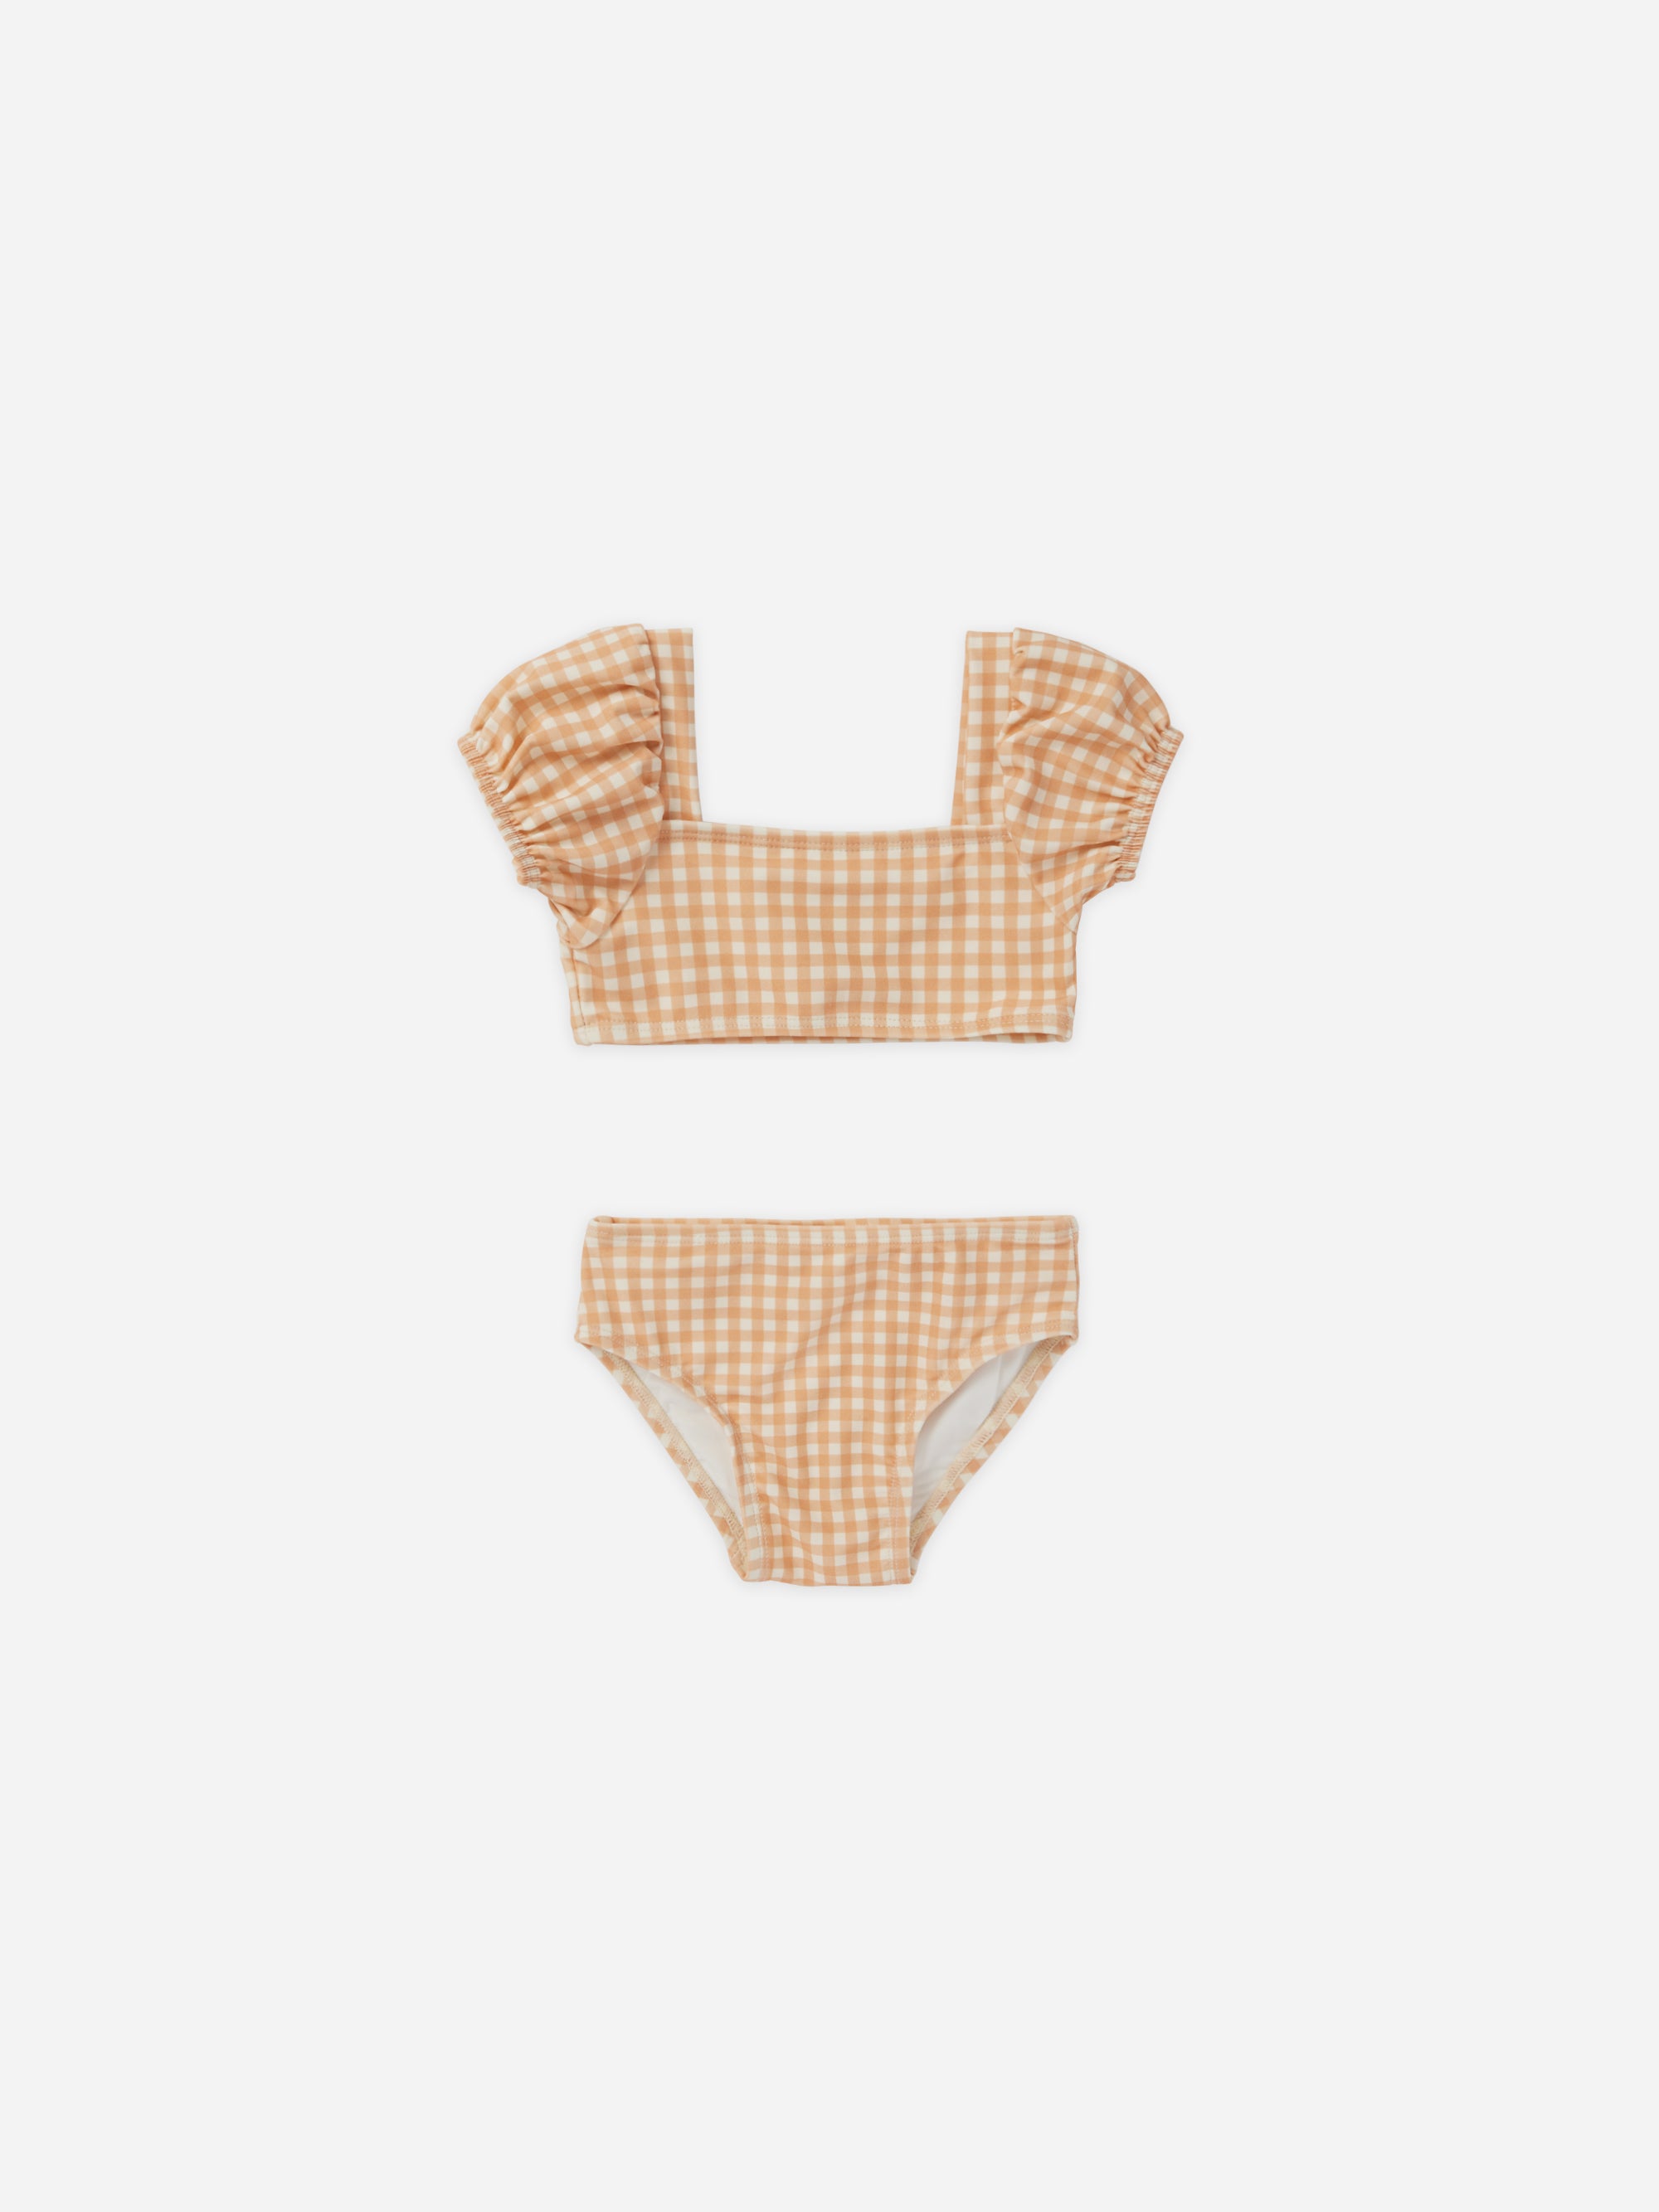 Zippy Two-Piece || Melon Gingham - Rylee + Cru | Kids Clothes | Trendy Baby Clothes | Modern Infant Outfits |